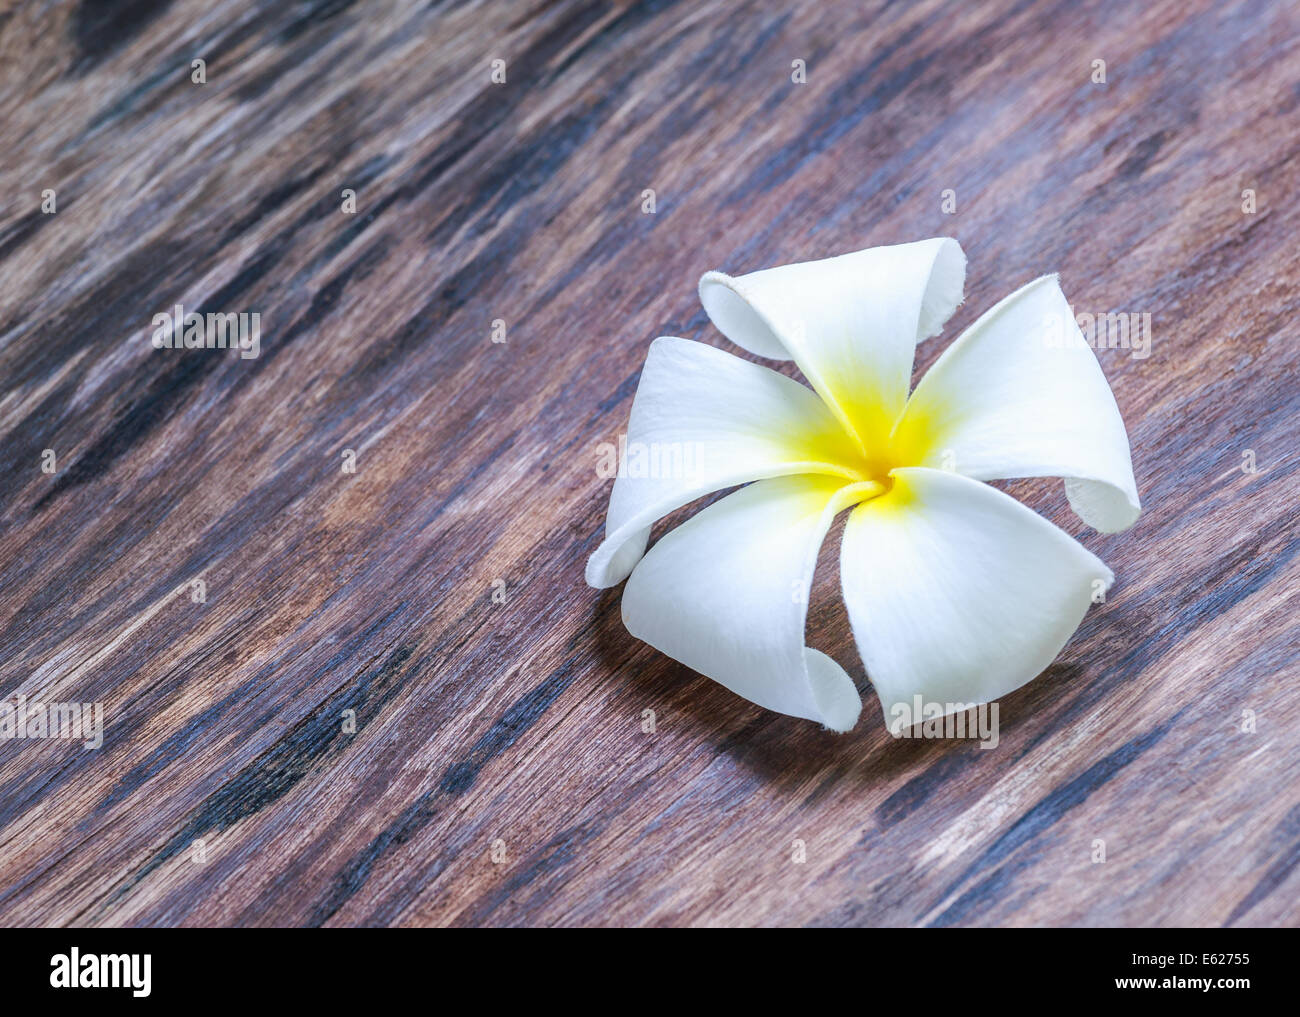 White and yellow frangipani flower on wooden floor Stock Photo